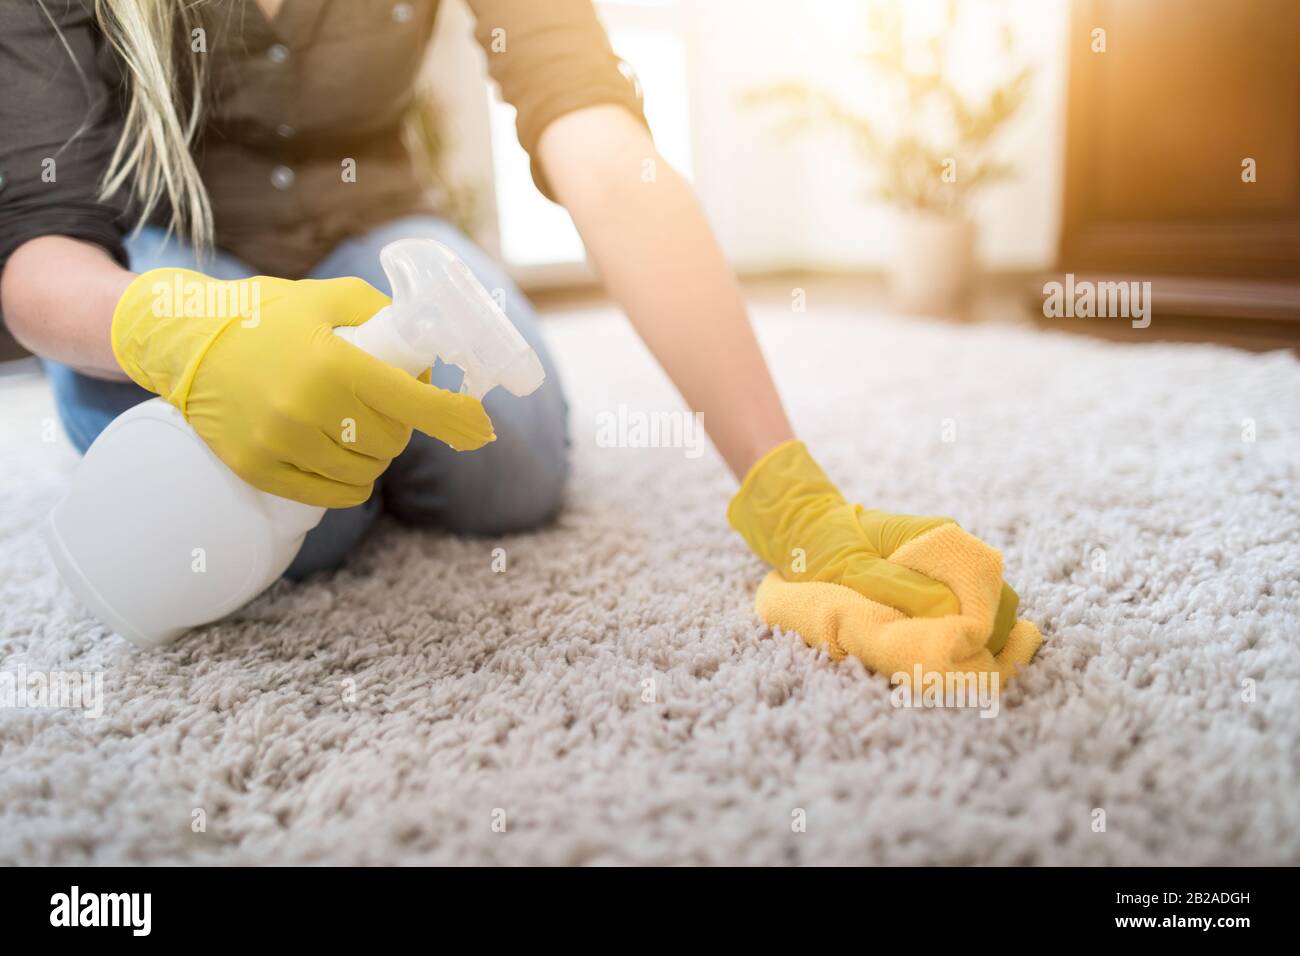 Housewife cleaning carpet with brush and doing housework. Stock Photo